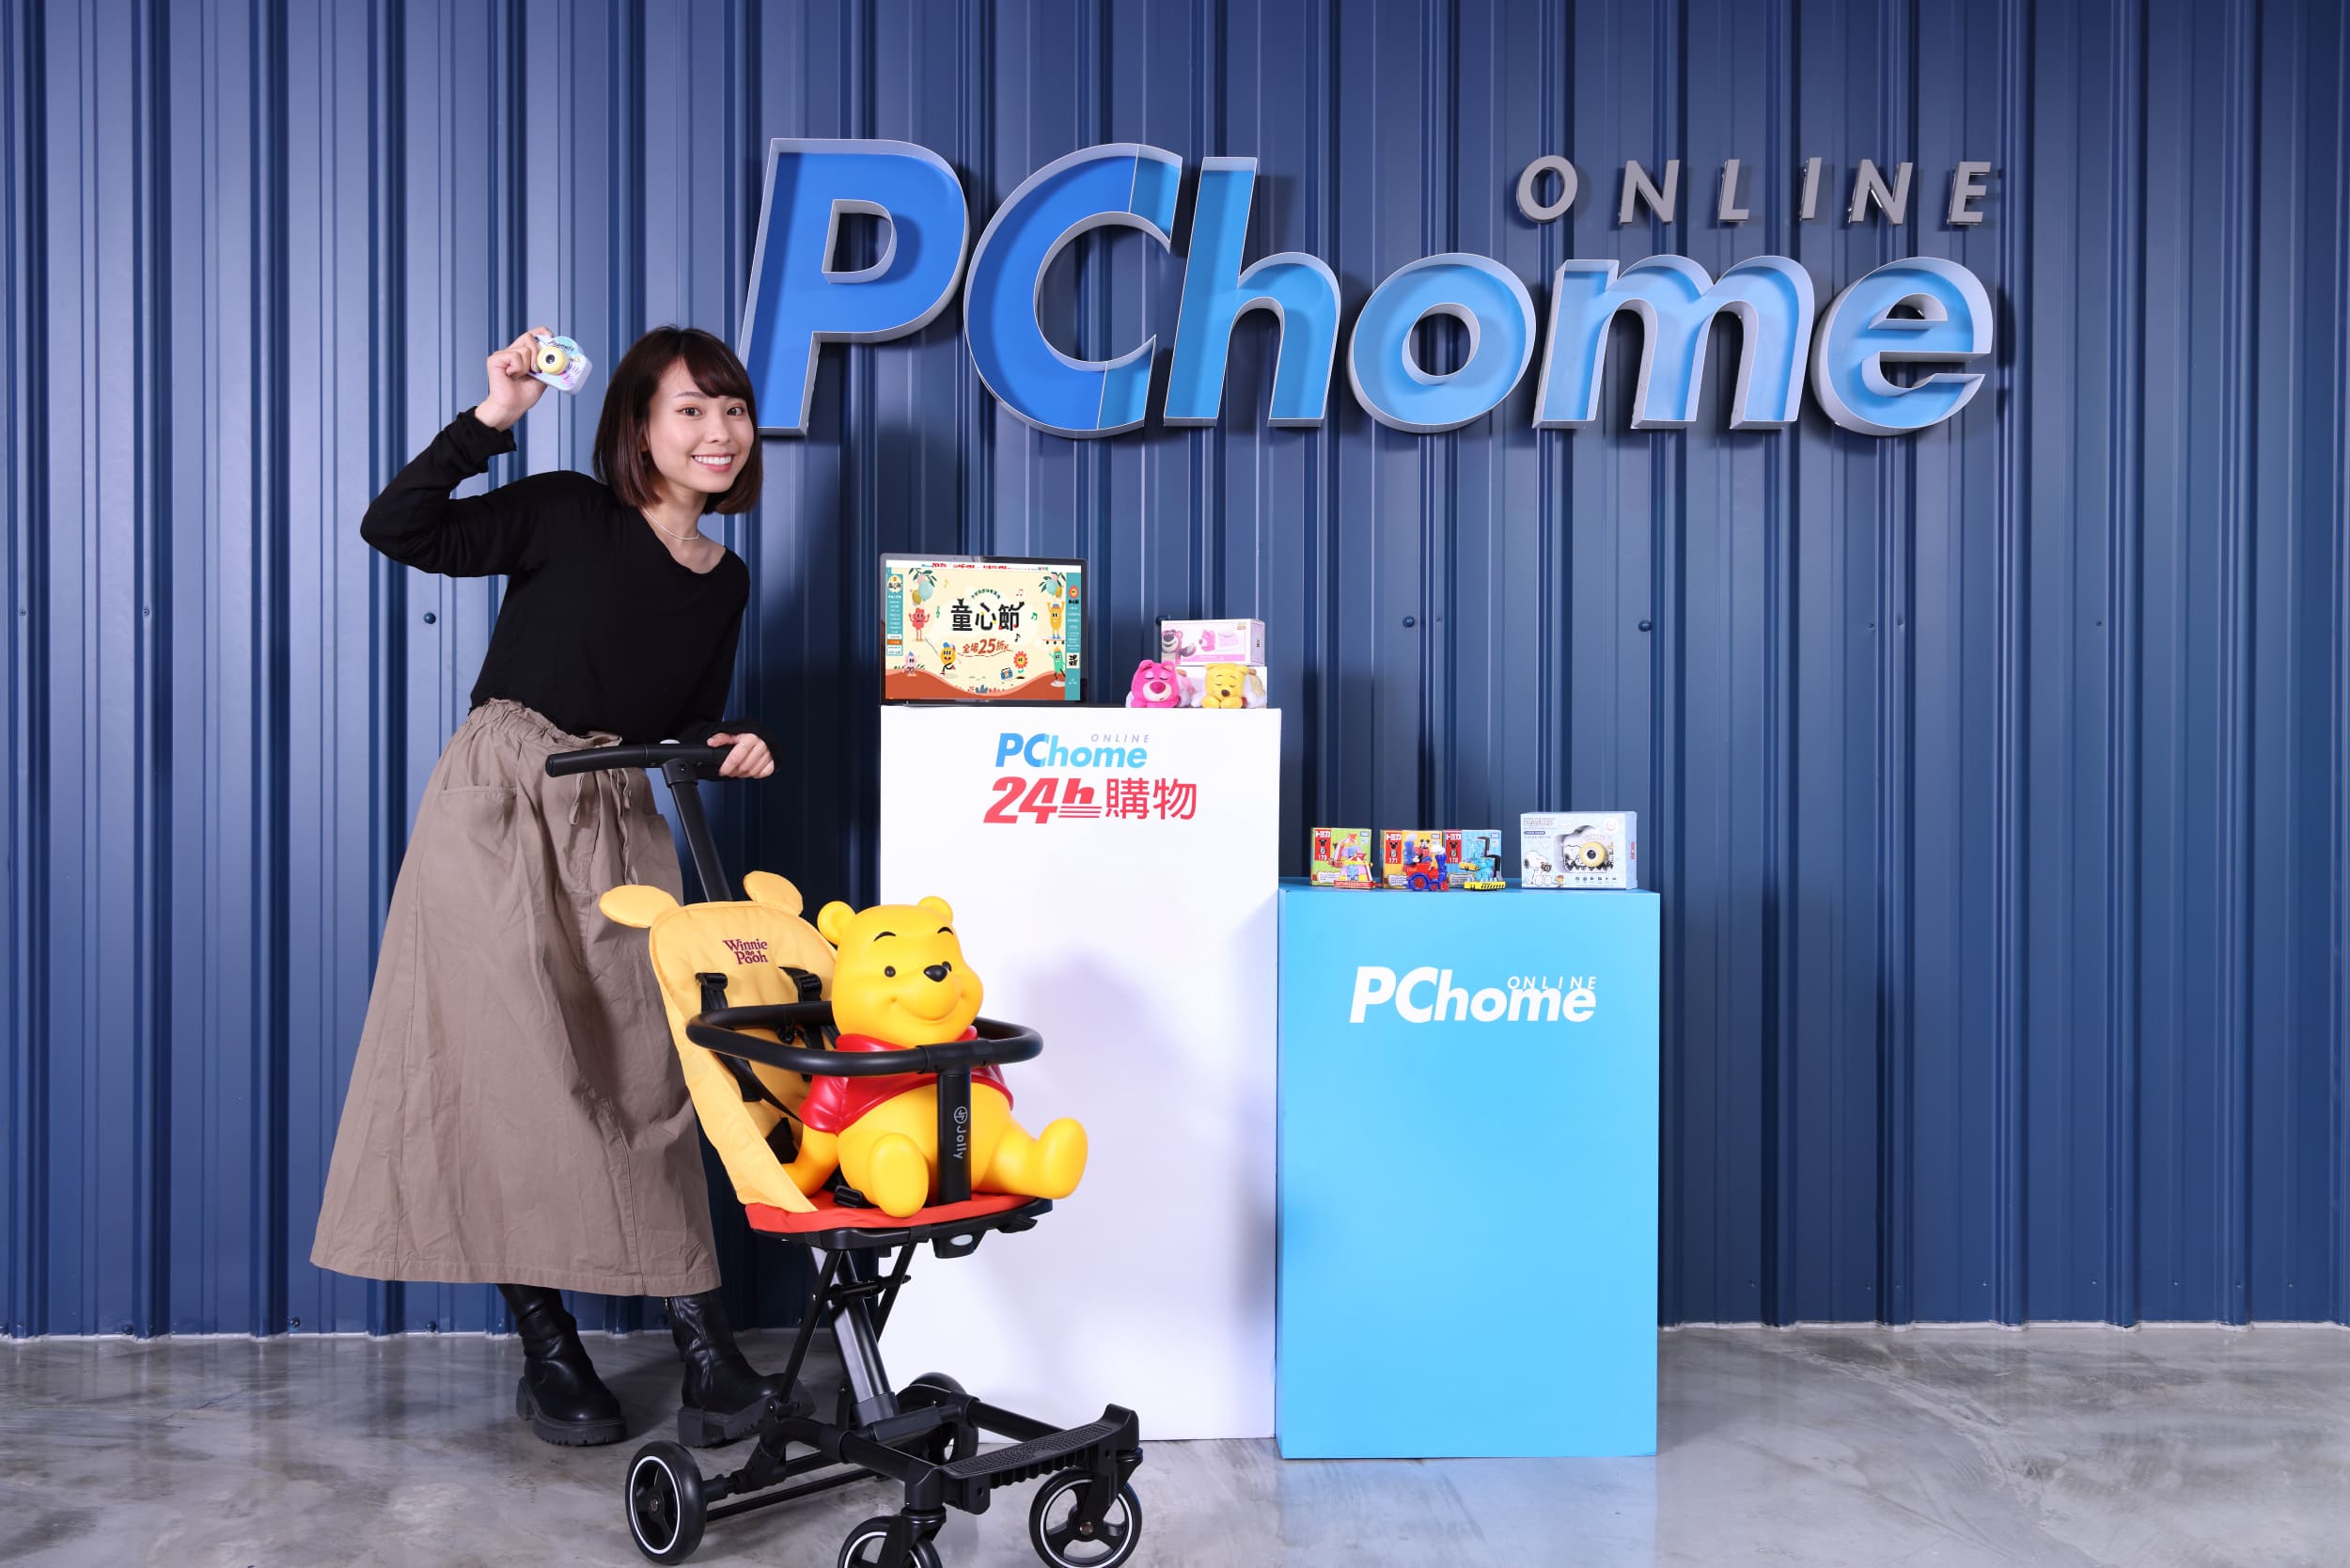 LEGO Sales Increases by 30% at PChome 24h Shopping Tips for Easy Long-Weekend Travel! Less than NT$500 for a One-Night Hualien Accommodation Voucher and up to 40% off for a Farglory Ocean Park Package